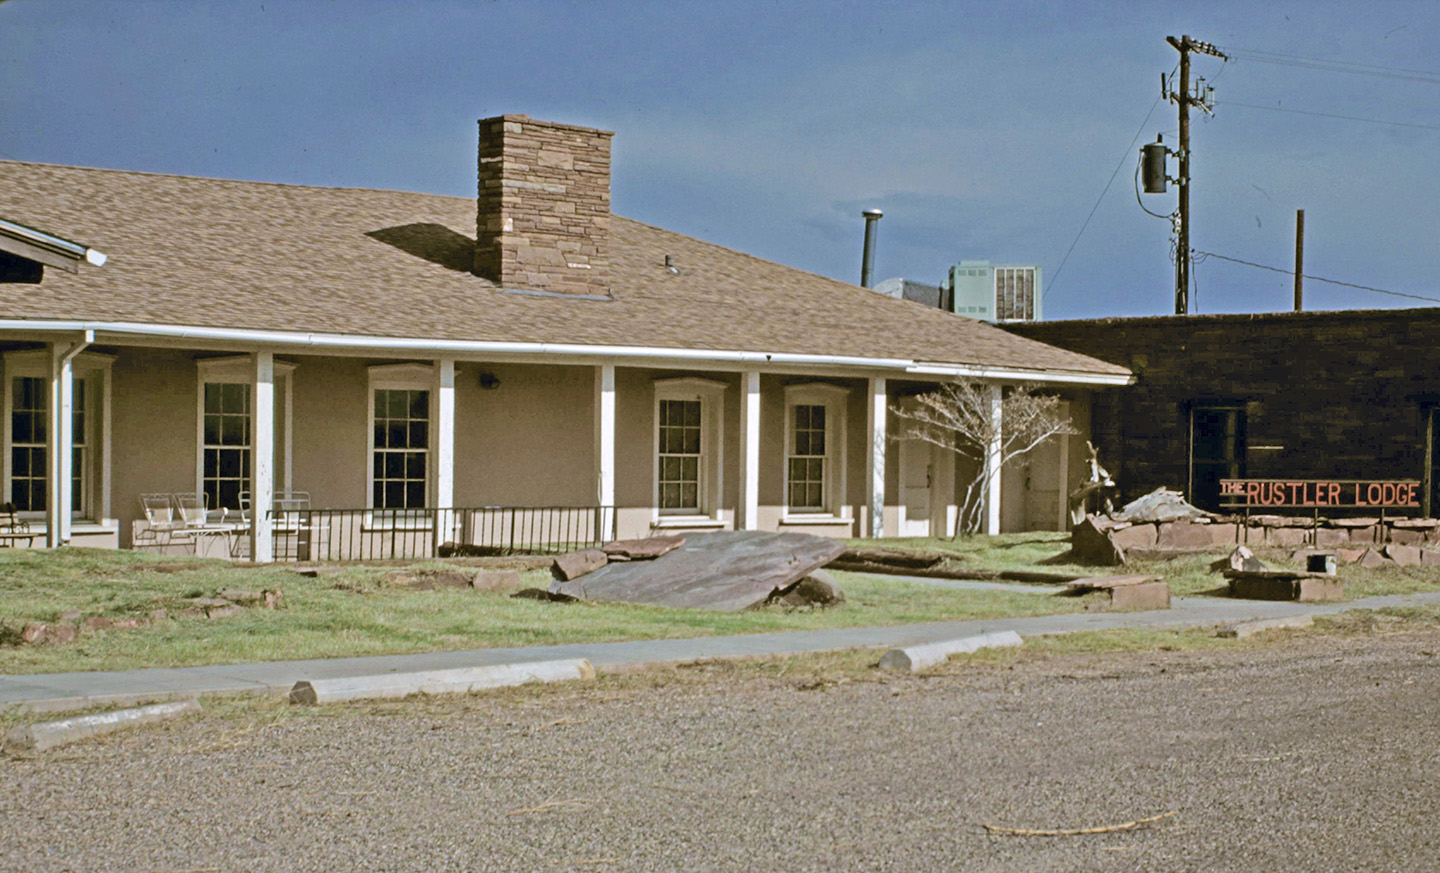 View of the exterior of the Conchas Lodge, date unknown.